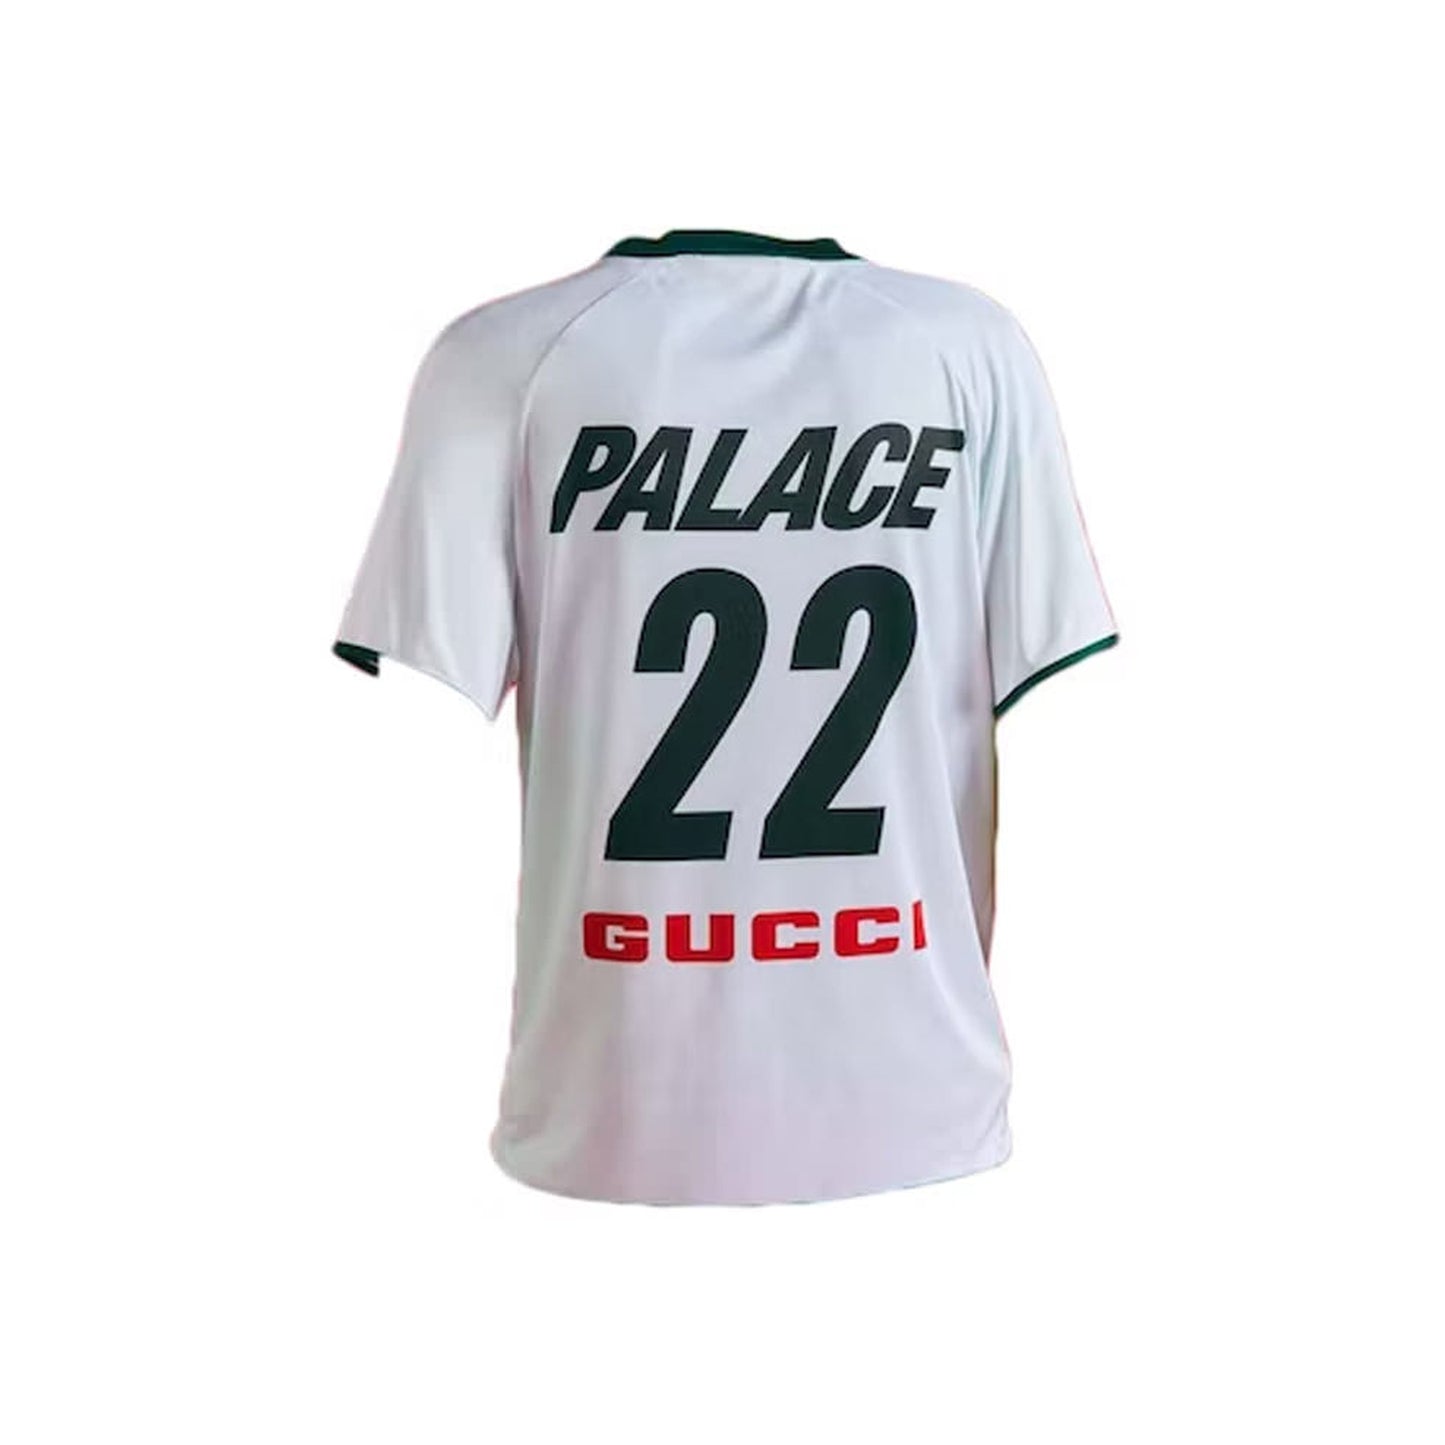 Palace x Gucci Printed Football Technical Jersey Tee White